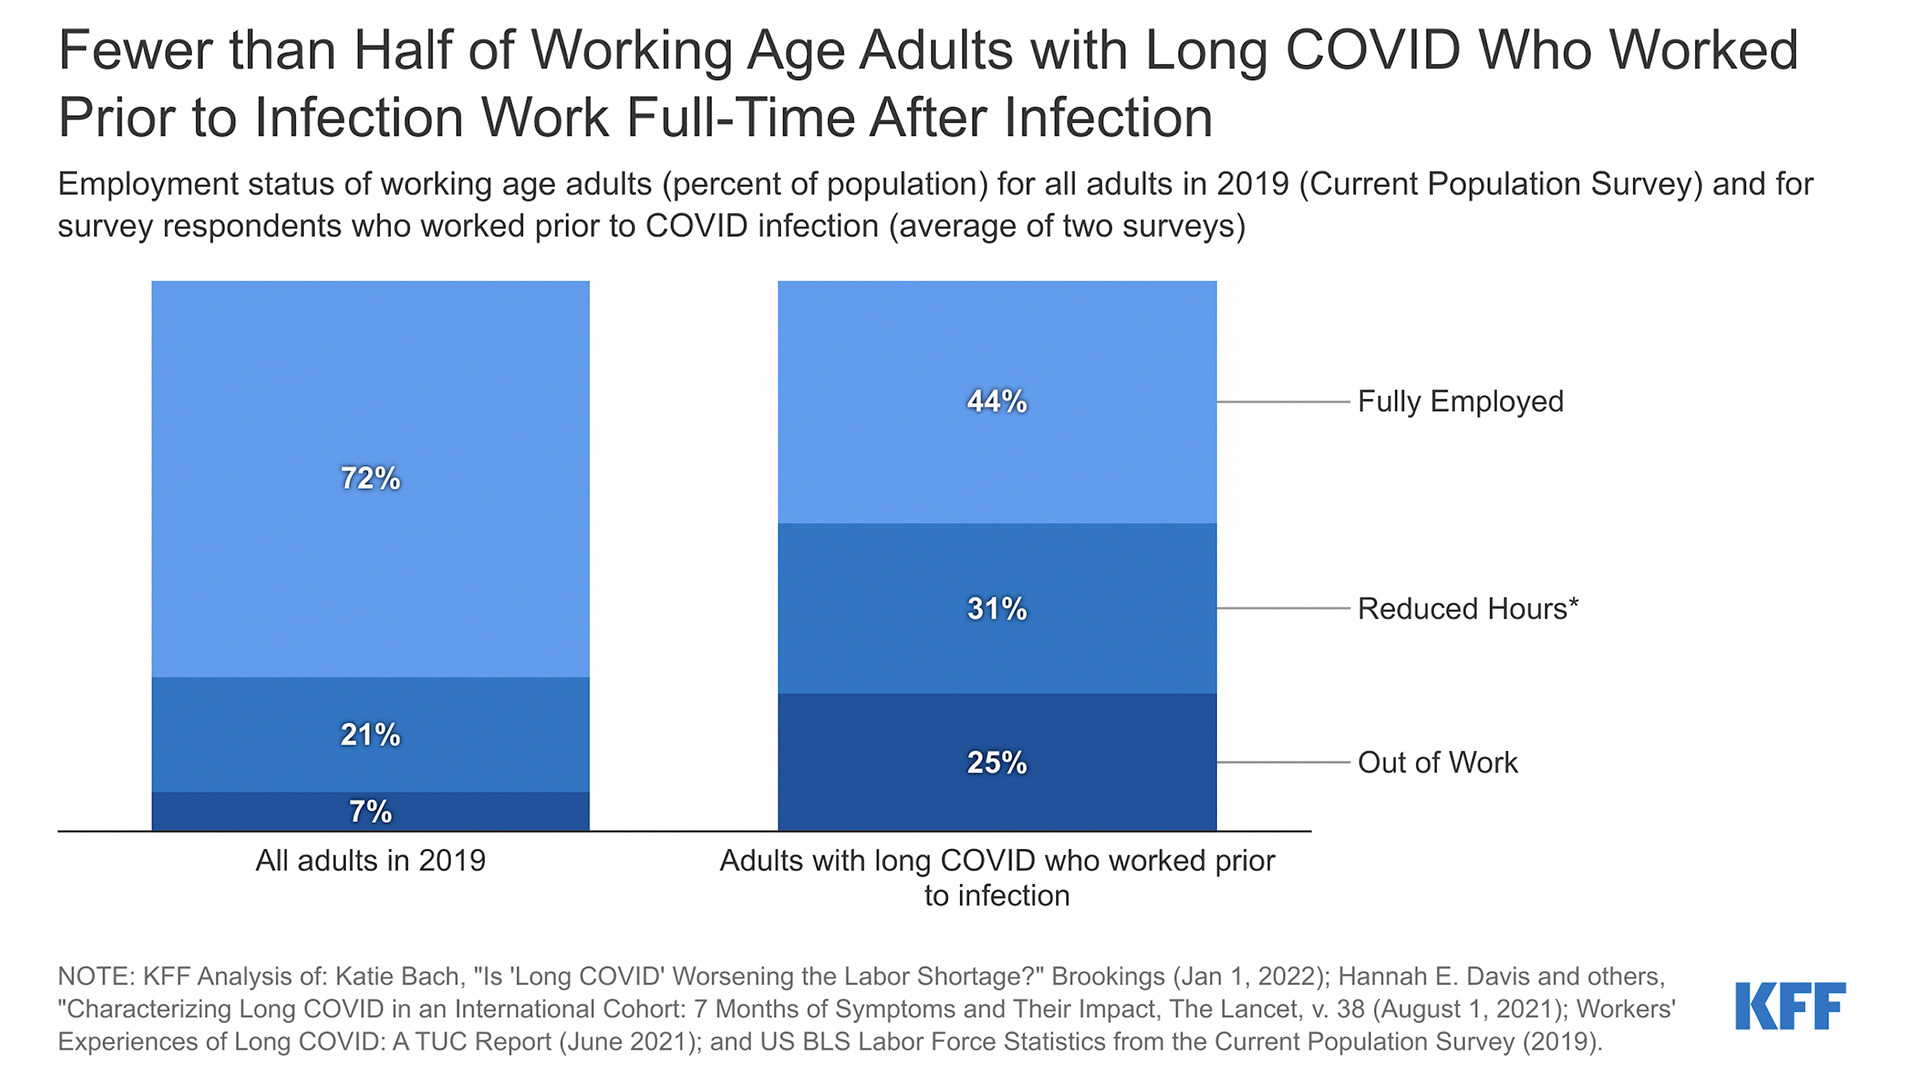 A chart comparing all adults in 2019 and working adults with Long COVID is titled "Fewer than Half of Working Age Adults with Long COVID Who Worked Prior to Infection Work Full-Time After Infection."